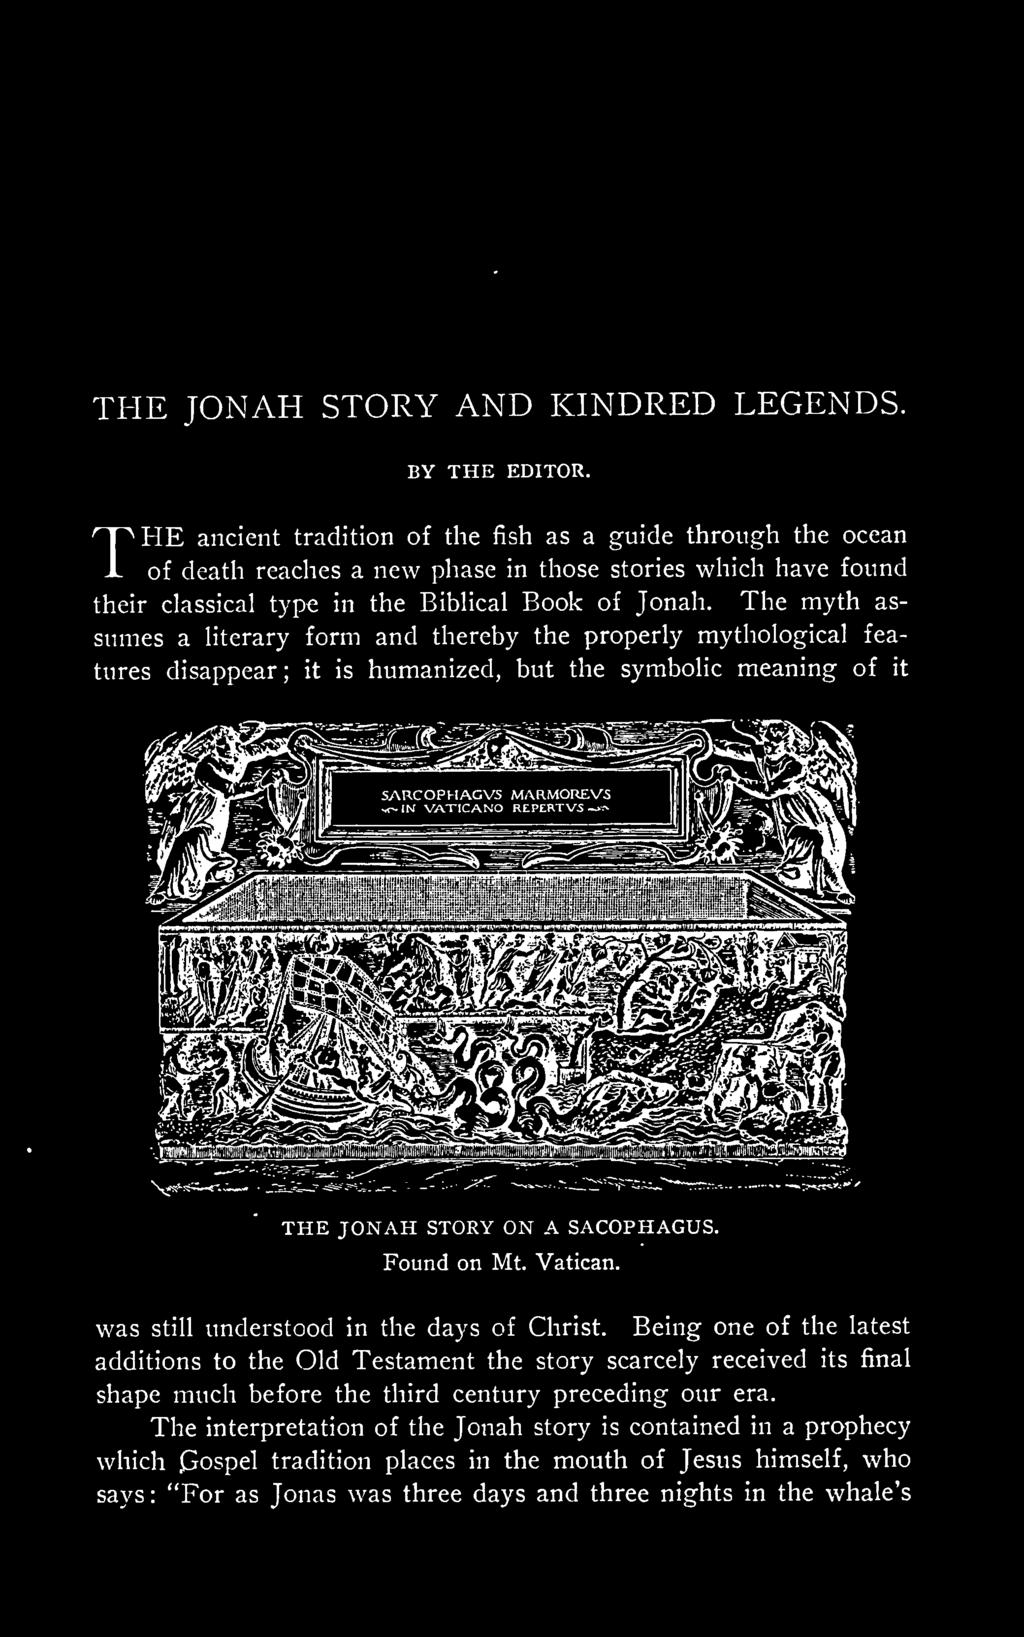 it THE JONAH STORY ON A SACOPHAGUS. Found on Mt. Vatican. was still understood in the days of Christ.